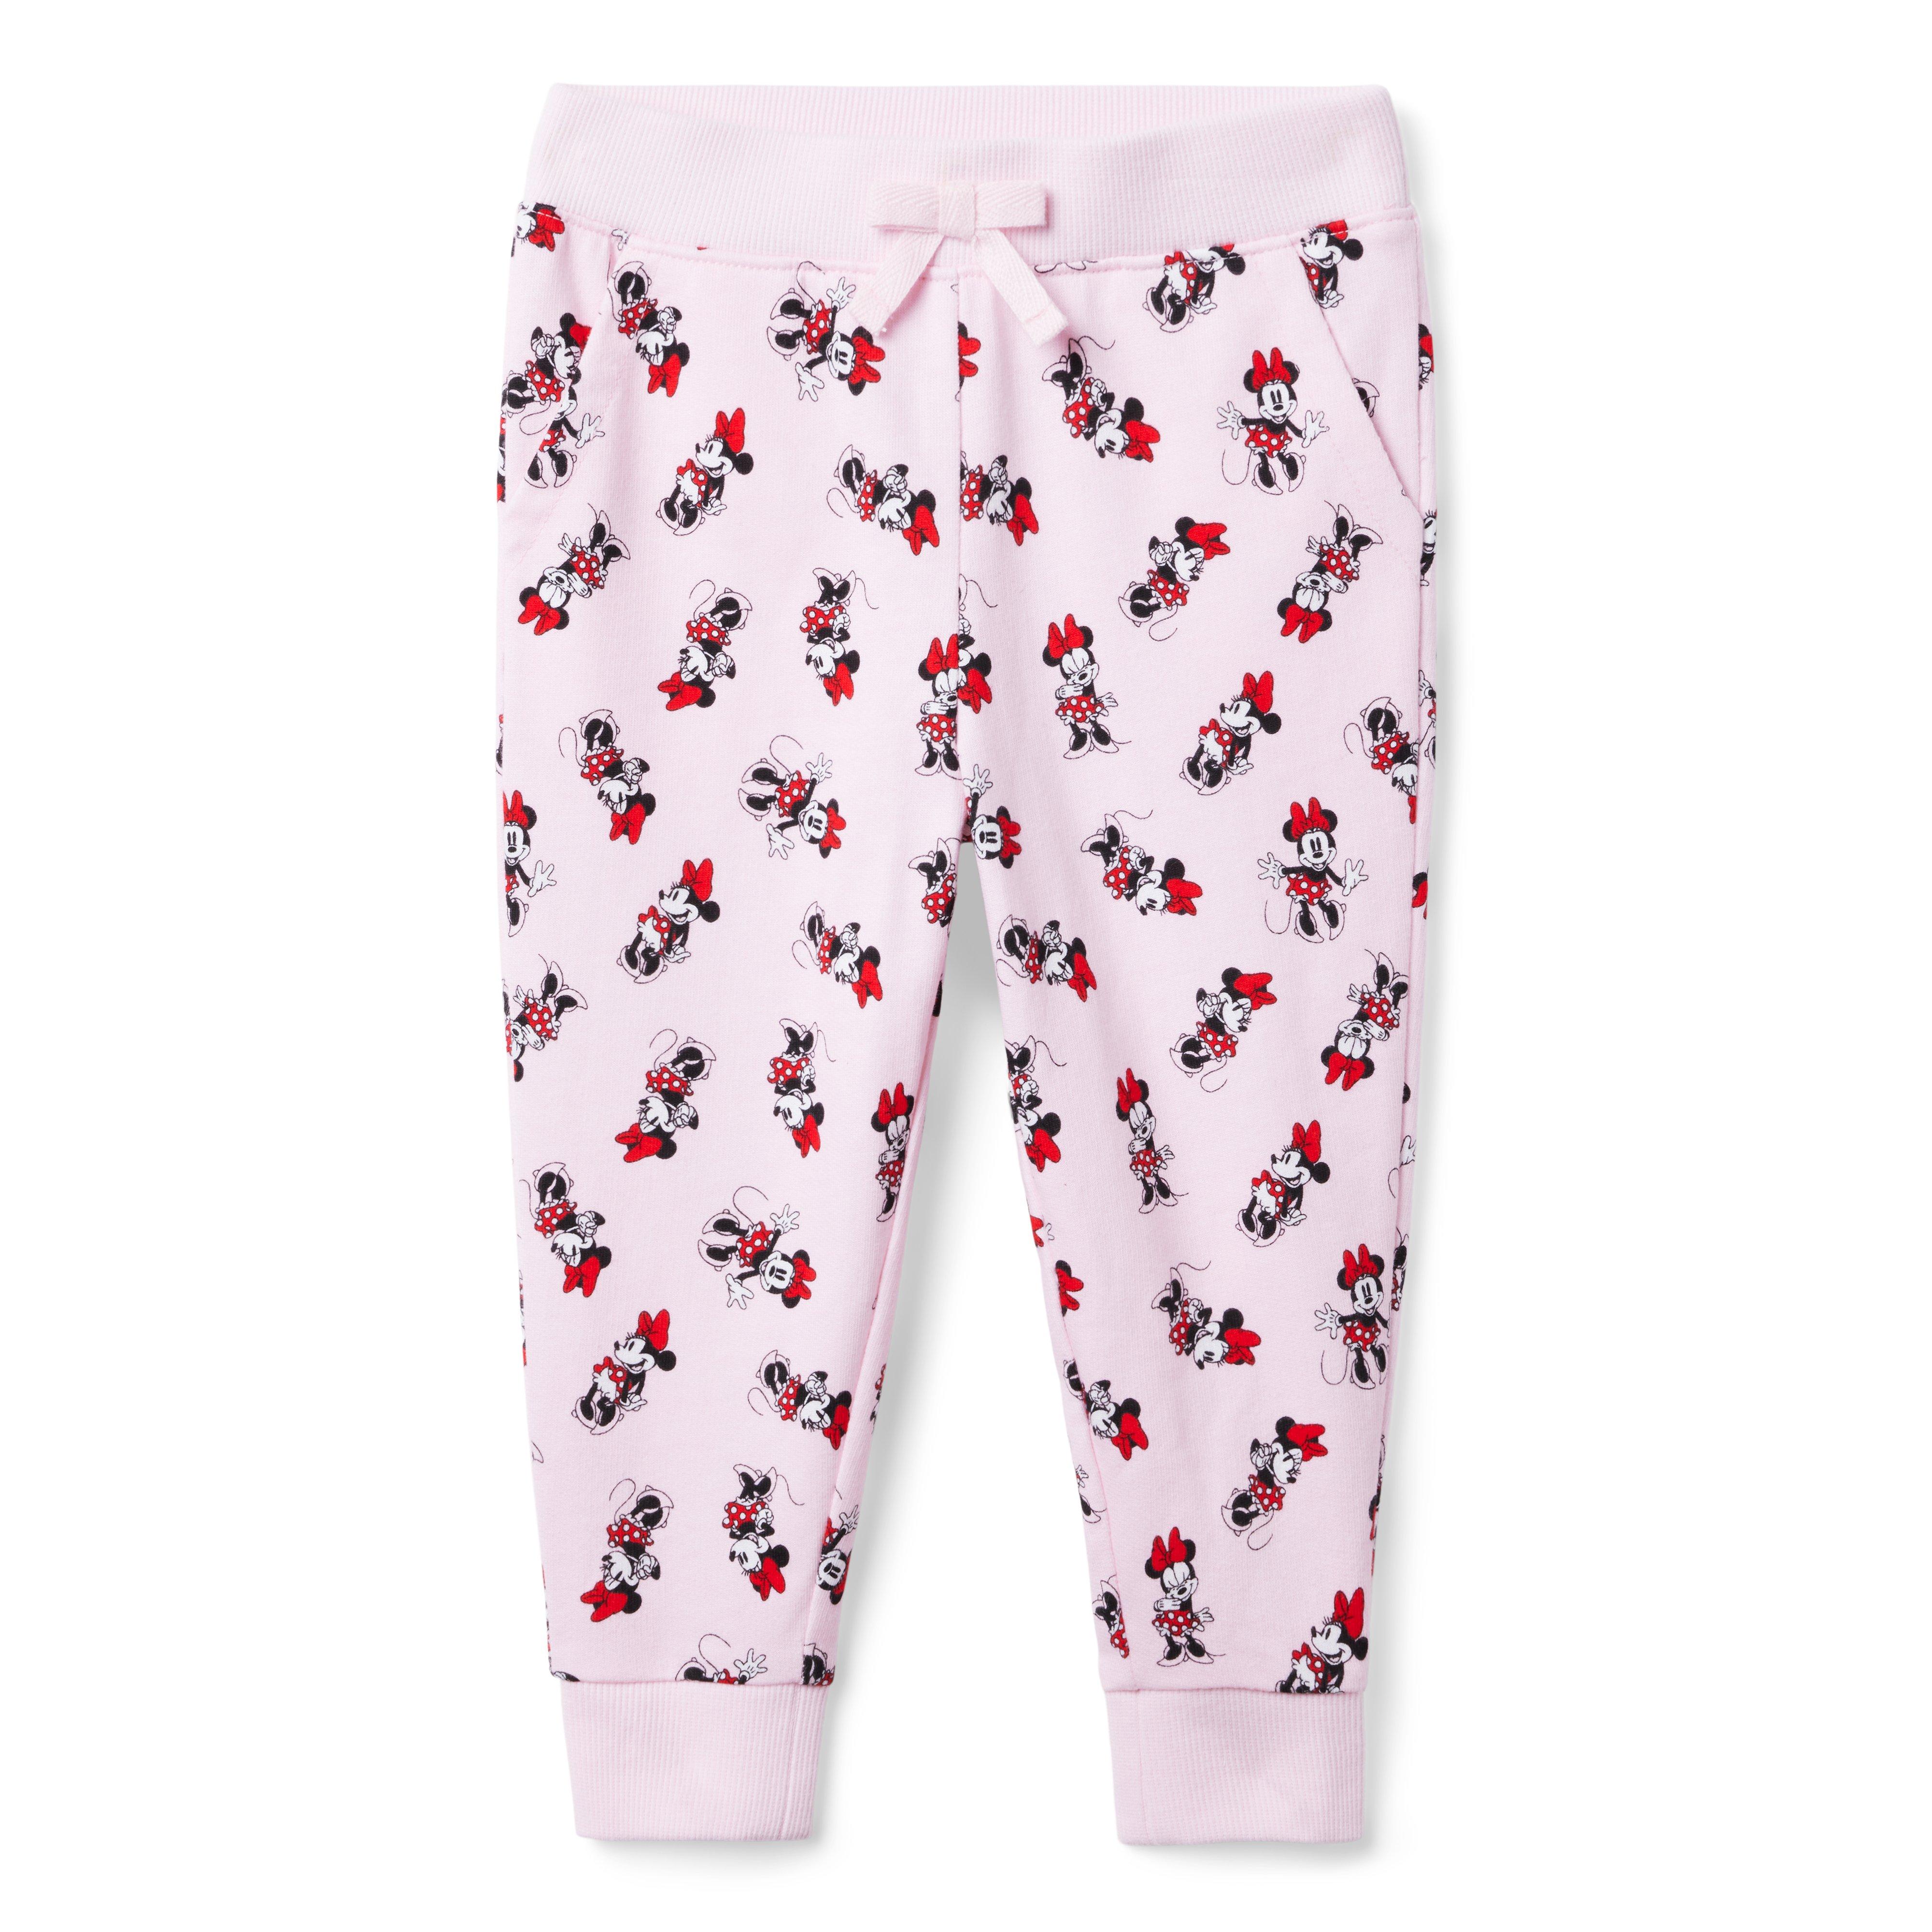 Disney Minnie Mouse NWT pink flare sweatpants